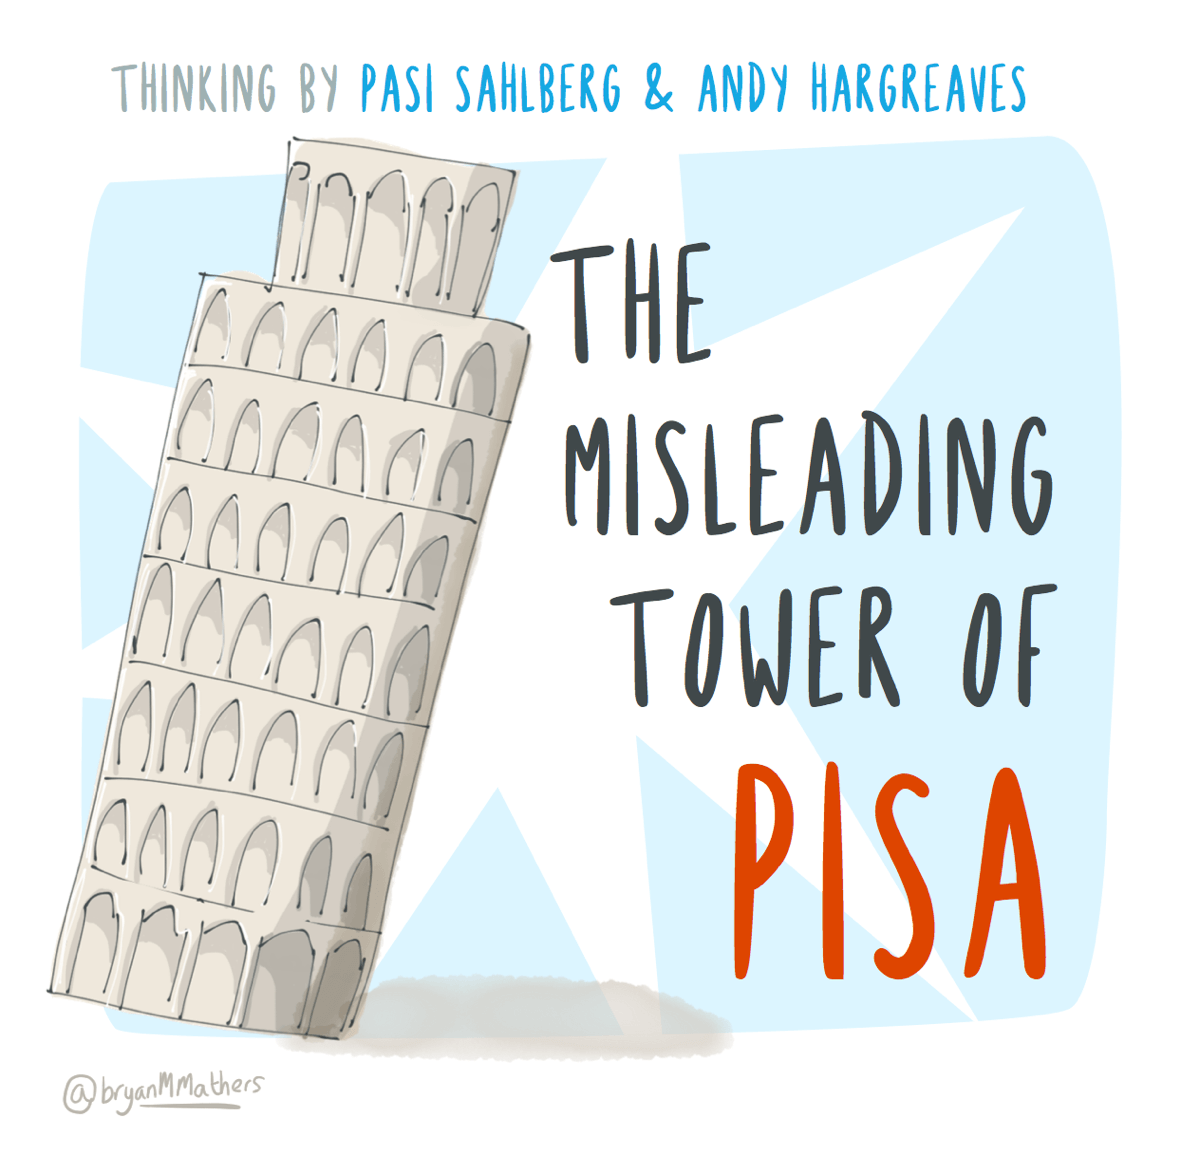 The Misleading Tower of PISA